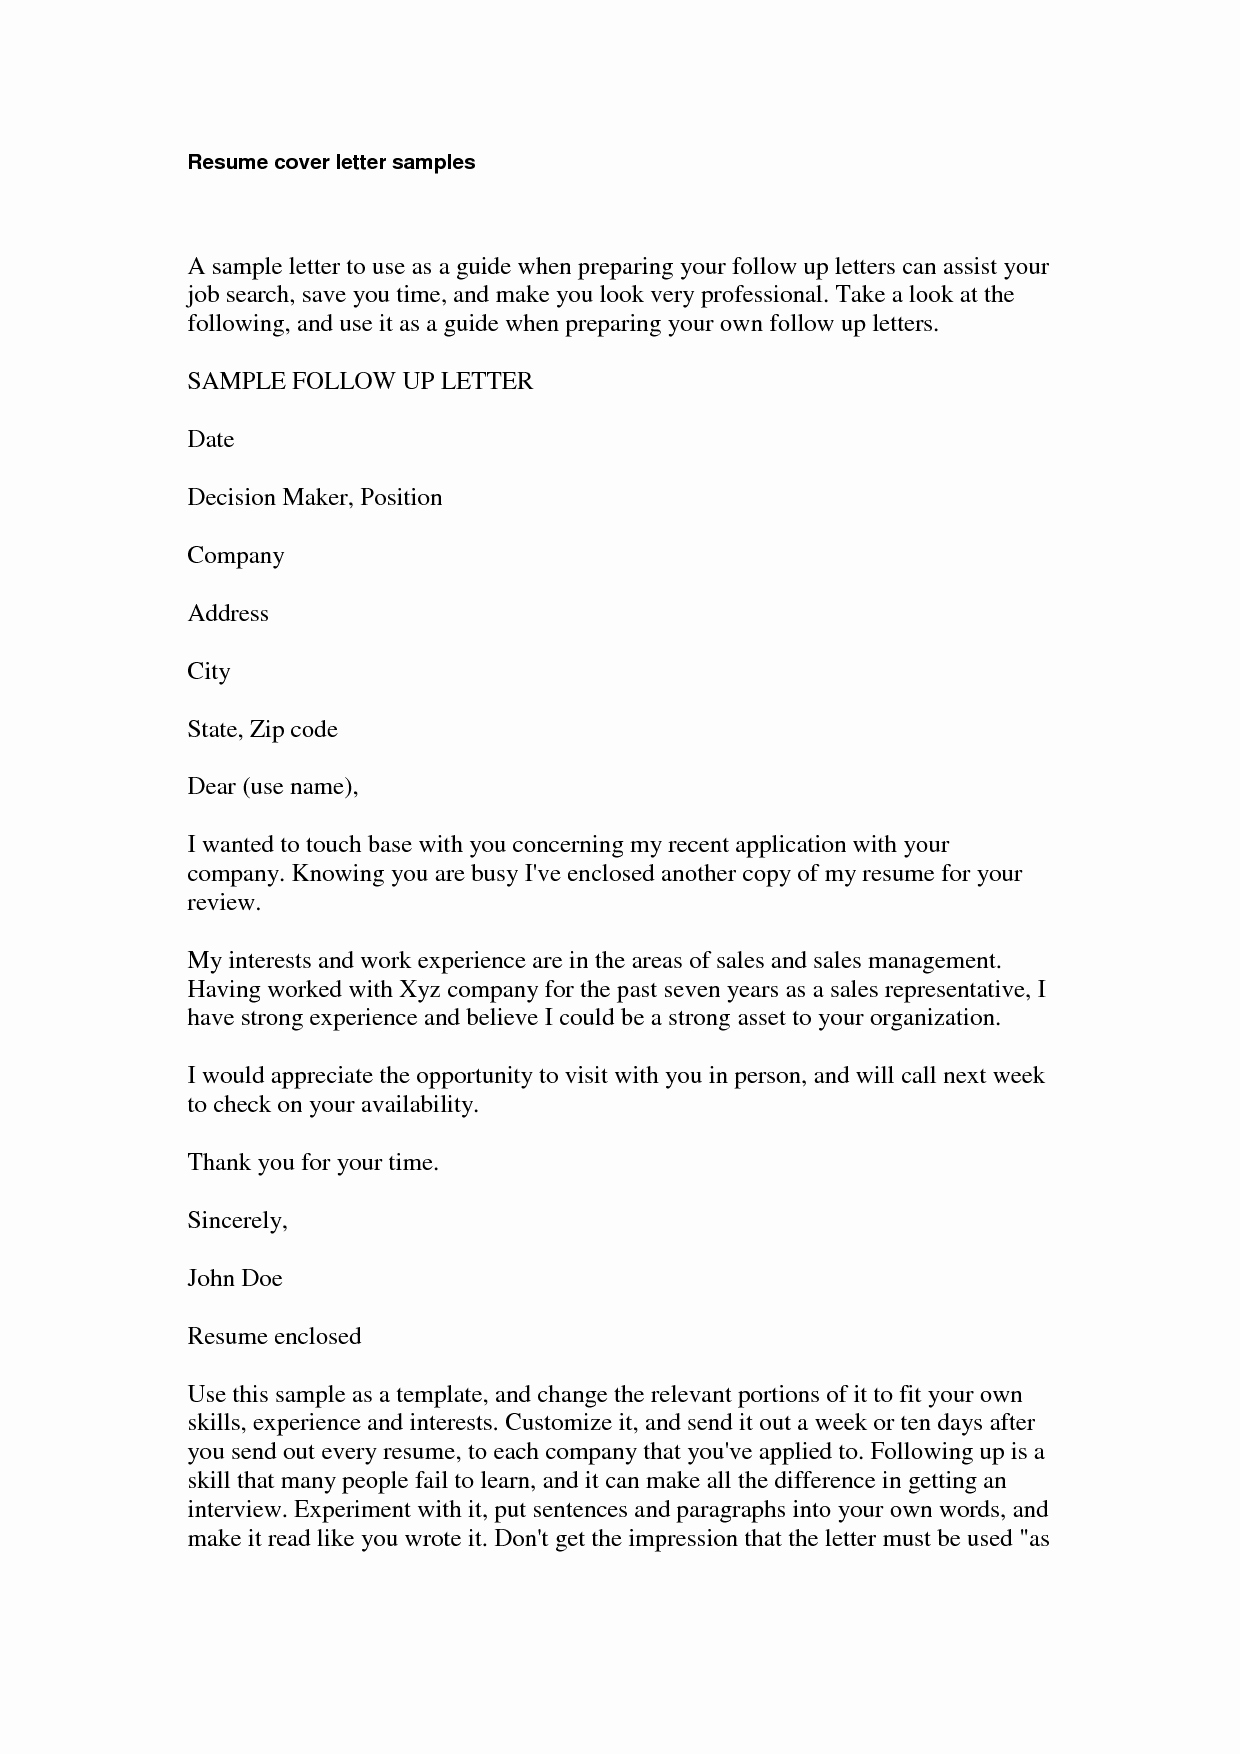 Resume Cover Letter Template Free Awesome Example Resume Cover Letters Sample Resumescover Letter